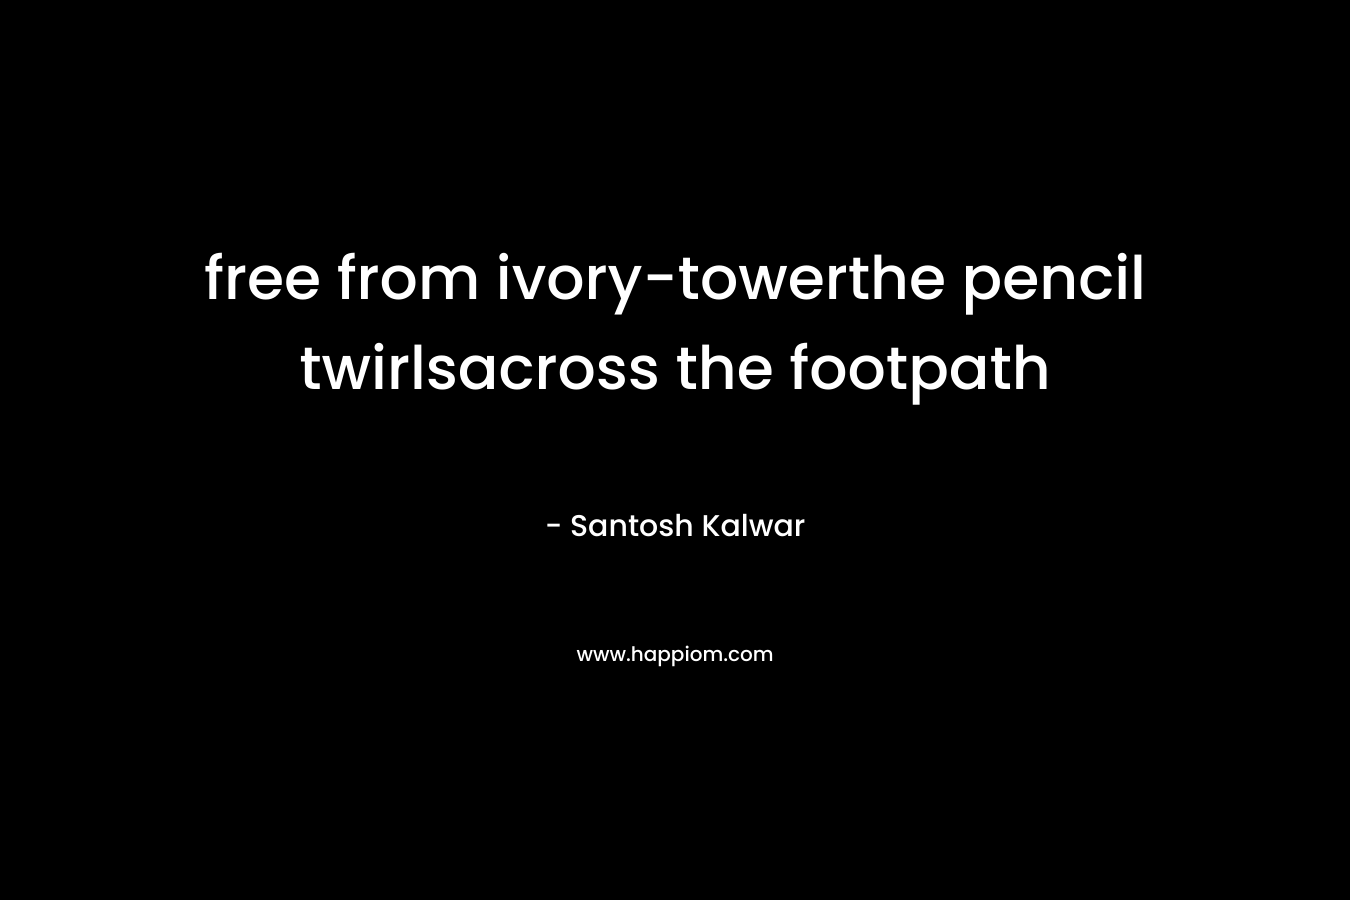 free from ivory-towerthe pencil twirlsacross the footpath